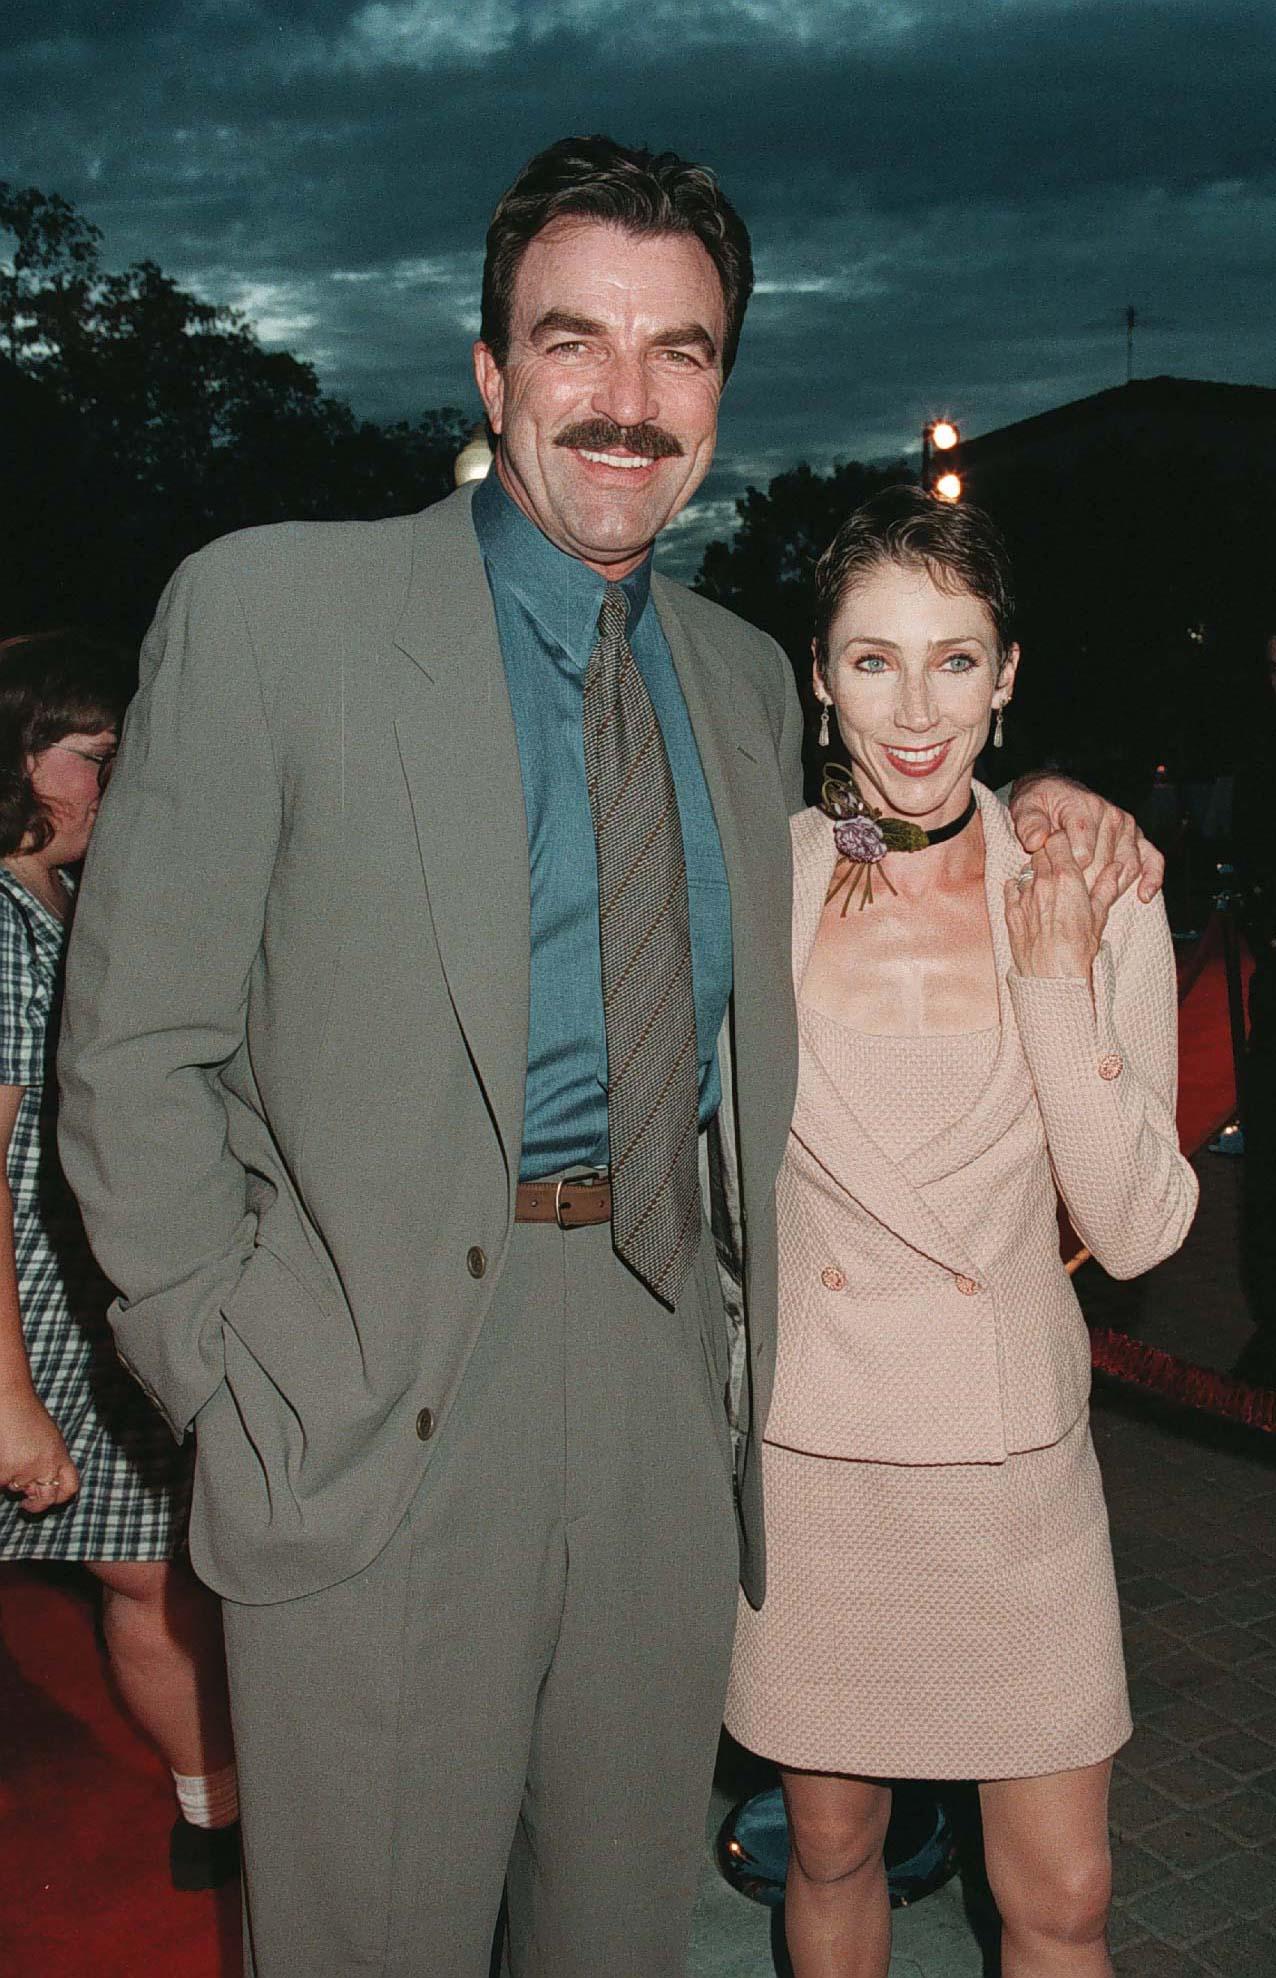 Who Is Tom Selleck's Wife? Meet His Second Spouse Jillie Mack